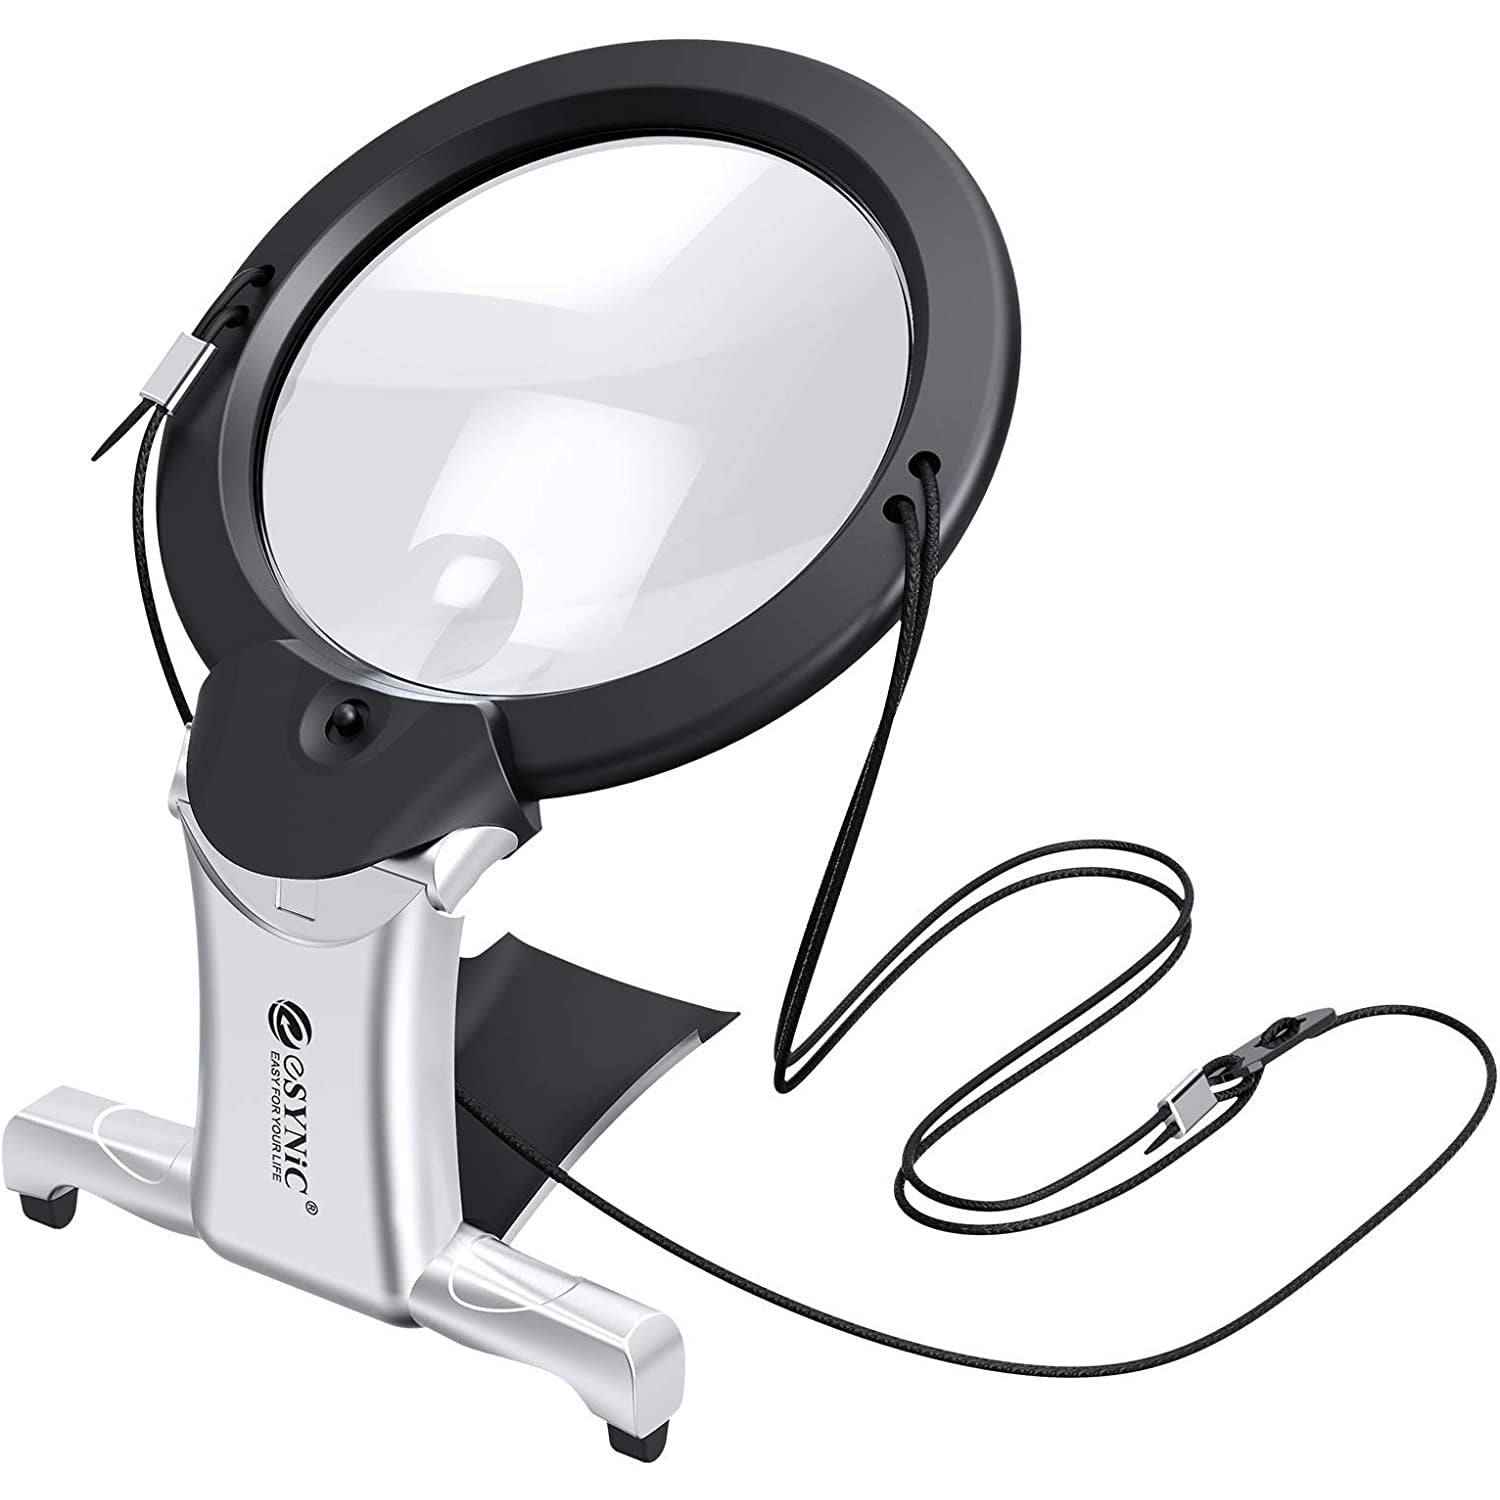 eSynic Popular 2 in 1 Hands Free Magnifier